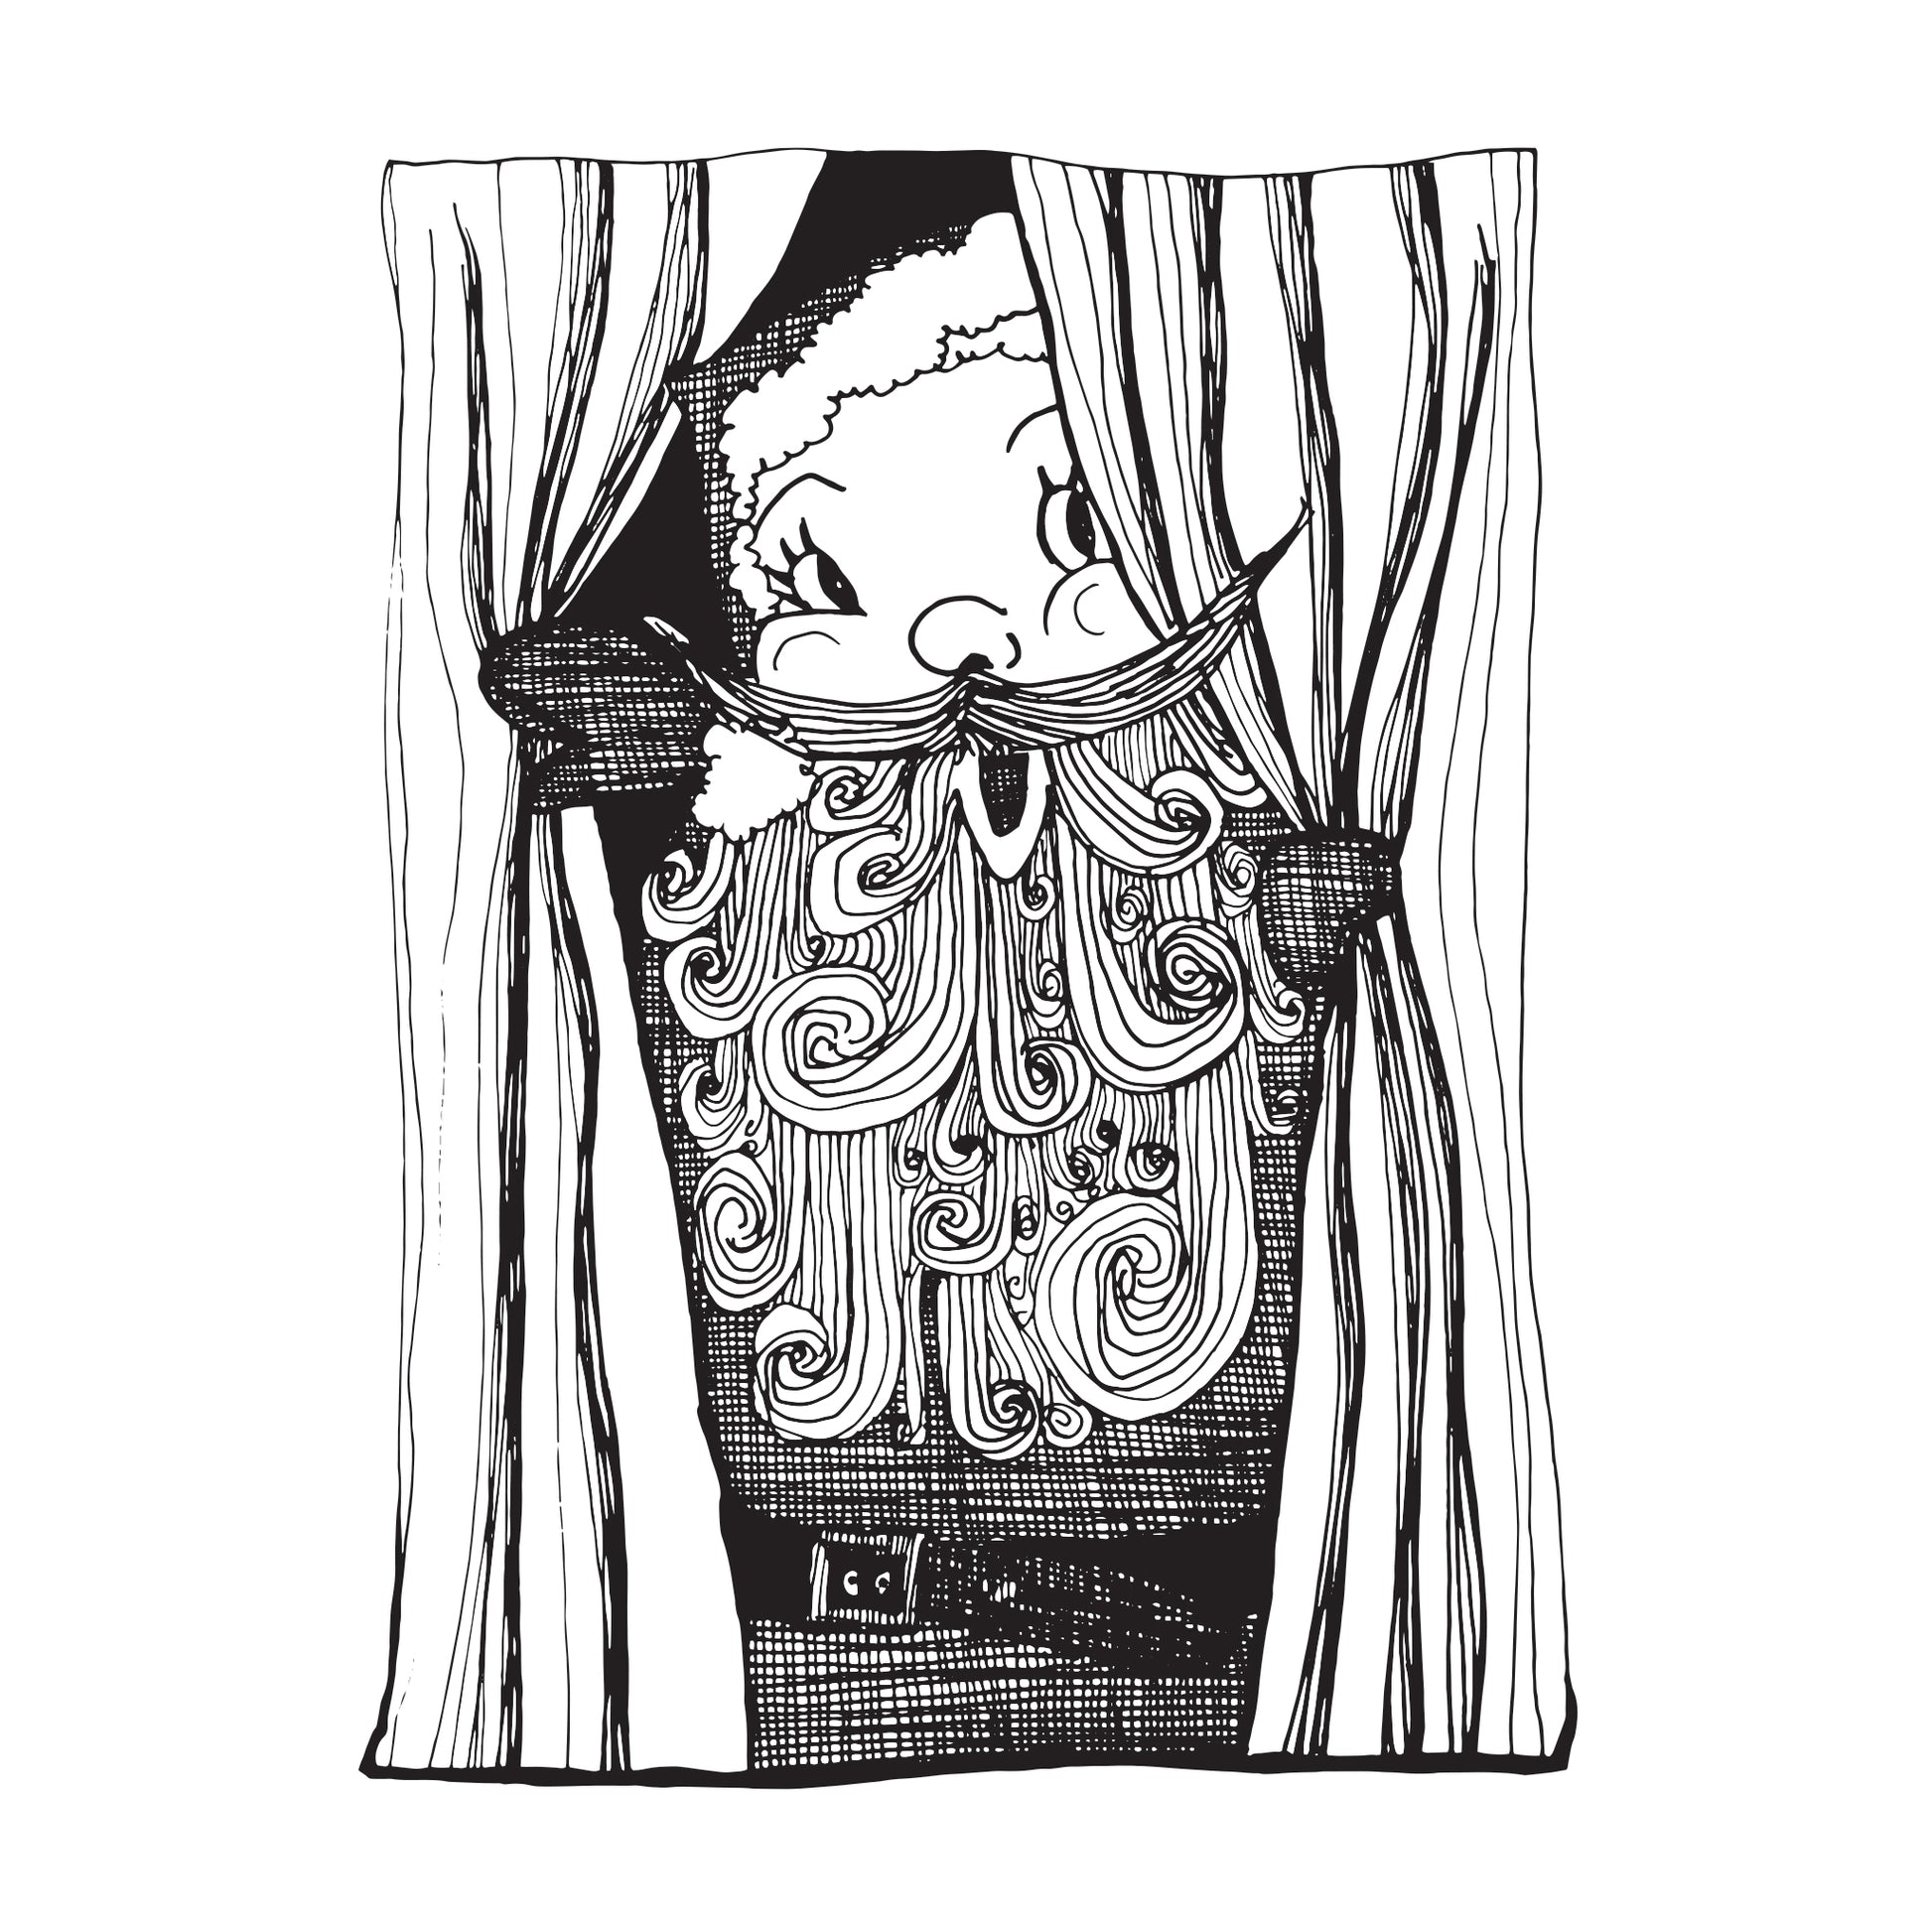 black and white illustration of a jolly santa peeking from behind curtains